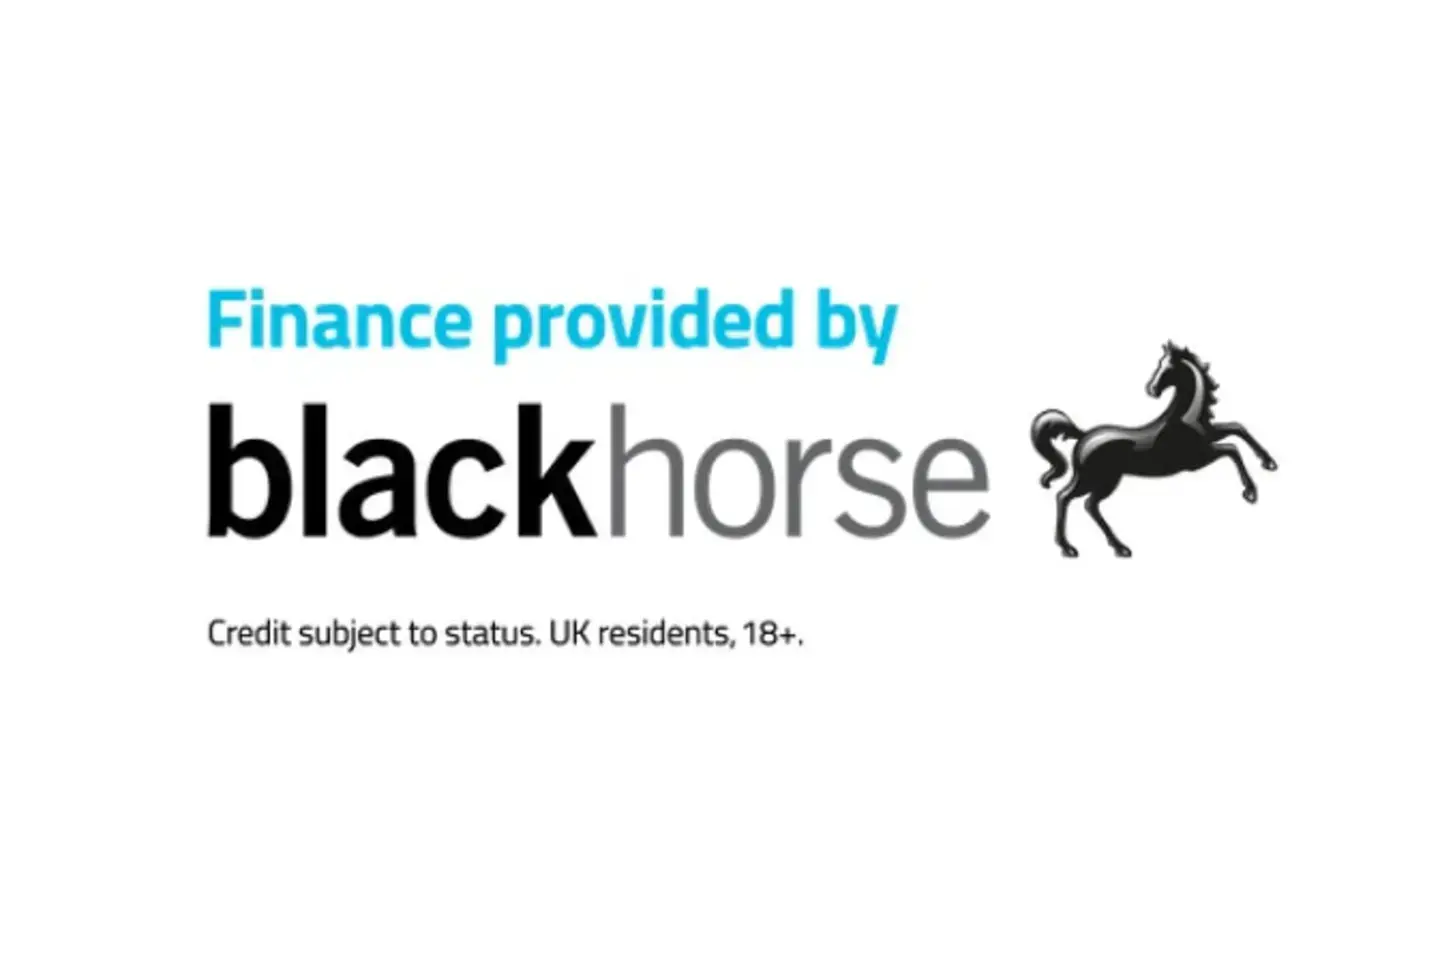 Blue text stating 'finance provided by', followed by emboldened black text that says 'black horse'. In smaller font beneath, black text states 'Credit subject to status. UK residents, 18+.' Beside the text is a picture of a black horse.